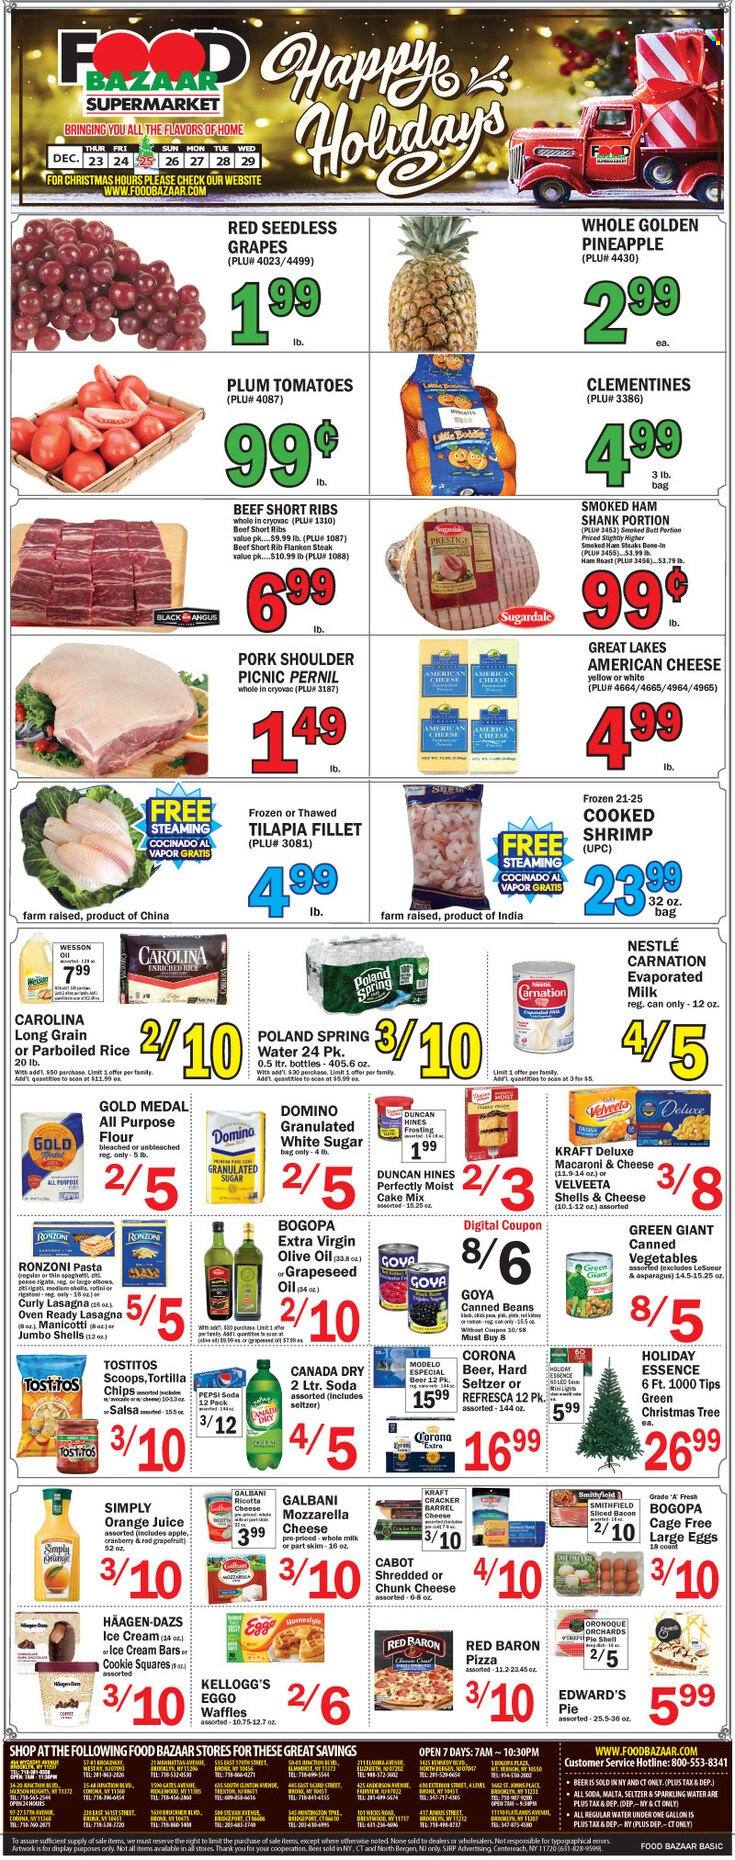 thumbnail - Food Bazaar Flyer - 12/23/2021 - 12/29/2021 - Sales products - seedless grapes, tortillas, pie, waffles, cake mix, asparagus, beans, grapefruits, grapes, pineapple, tilapia, shrimps, pizza, pasta, lasagna meal, Kraft®, Sugardale, bacon, ham, smoked ham, ham steaks, american cheese, ricotta, Galbani, chunk cheese, evaporated milk, cage free eggs, large eggs, Rama, ice cream, ice cream bars, Häagen-Dazs, Red Baron, Nestlé, crackers, Kellogg's, Tostitos, all purpose flour, frosting, granulated sugar, sugar, Goya, rice, salsa, extra virgin olive oil, olive oil, oil, grape seed oil, Canada Dry, Pepsi, orange juice, juice, spring water, soda, sparkling water, Hard Seltzer, beer, Corona Extra, Modelo, beef ribs, steak, pork meat, pork shoulder, clementines. Page 1.